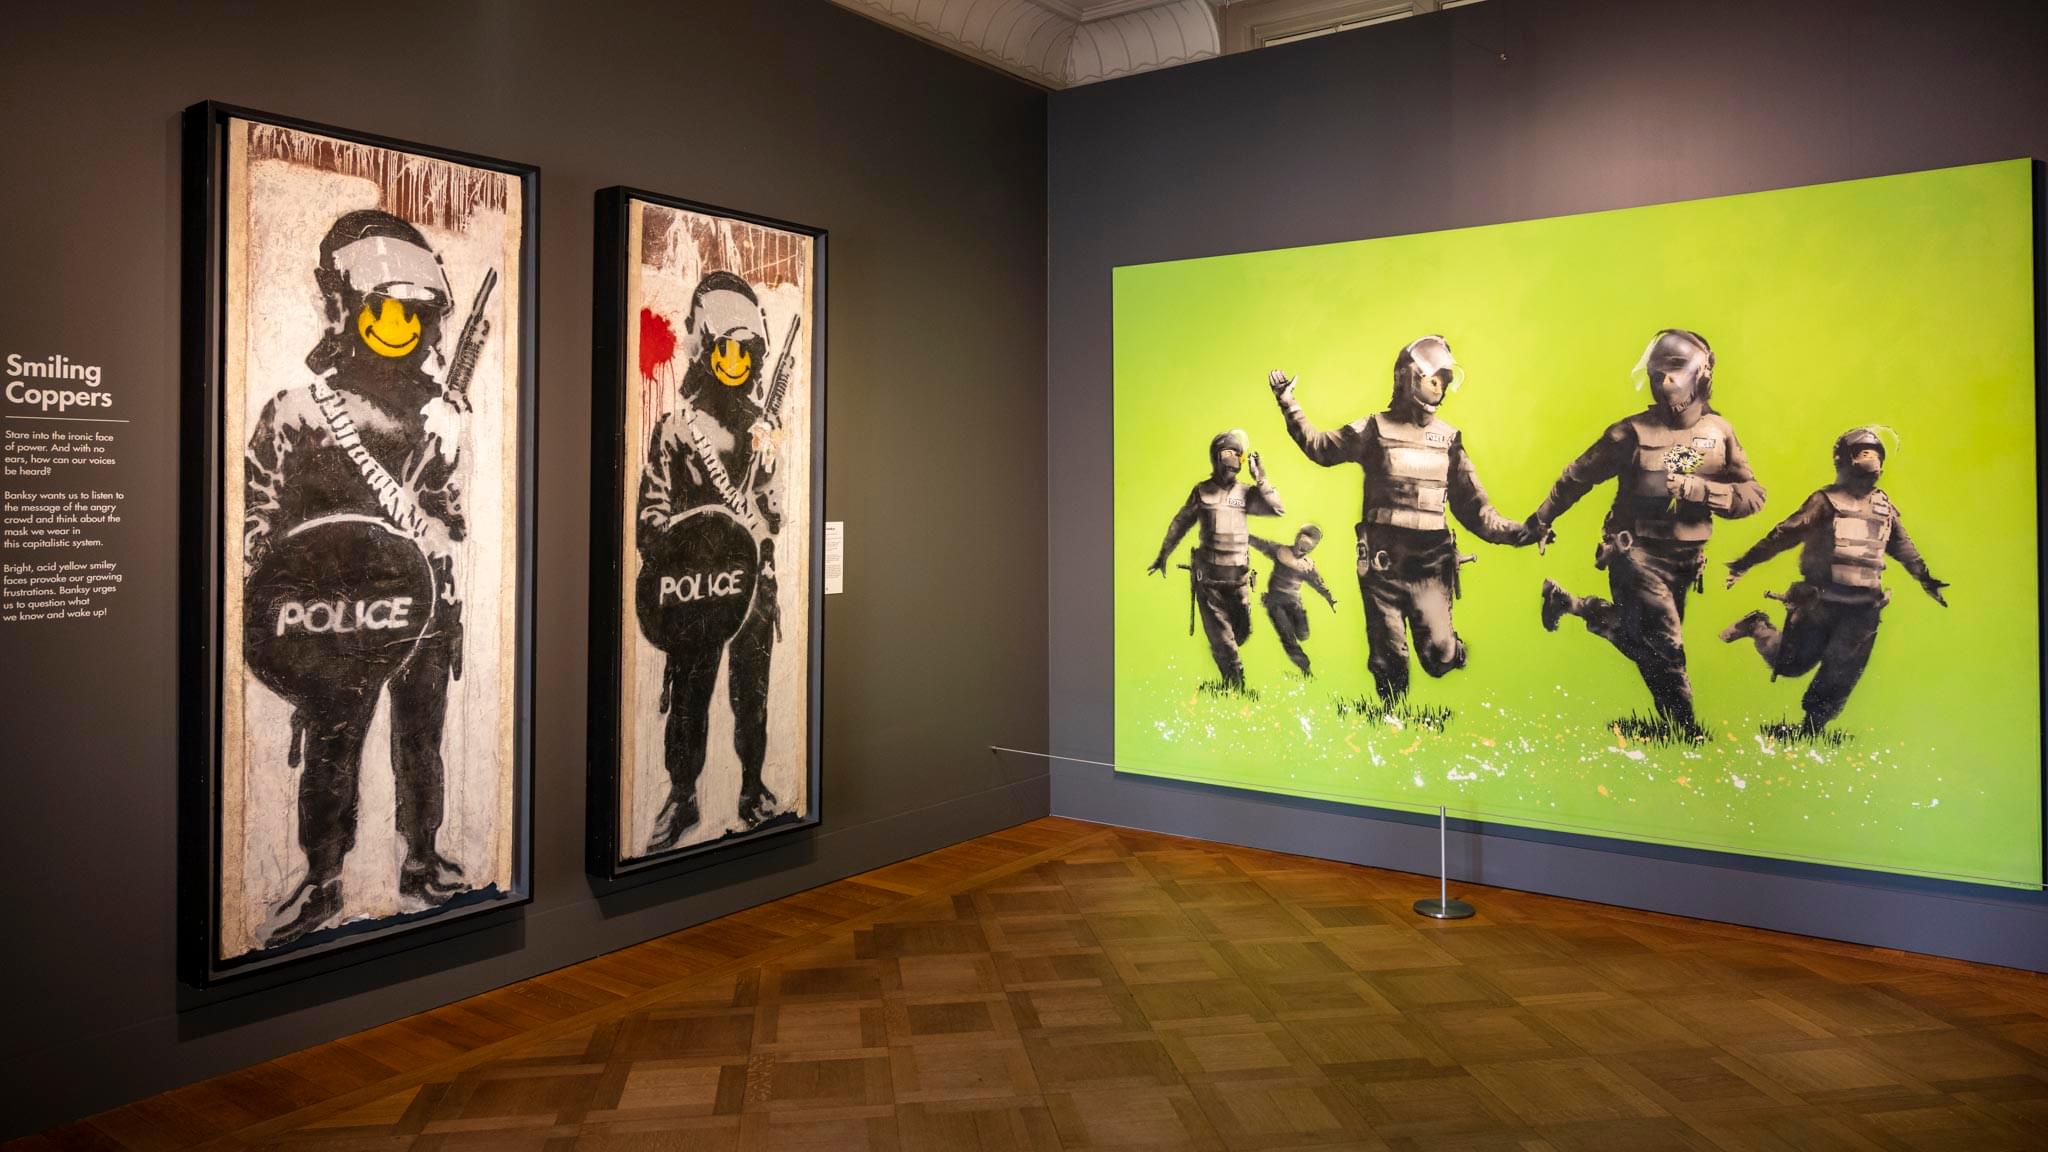 Attend the Banksy: Laugh Now exhibition